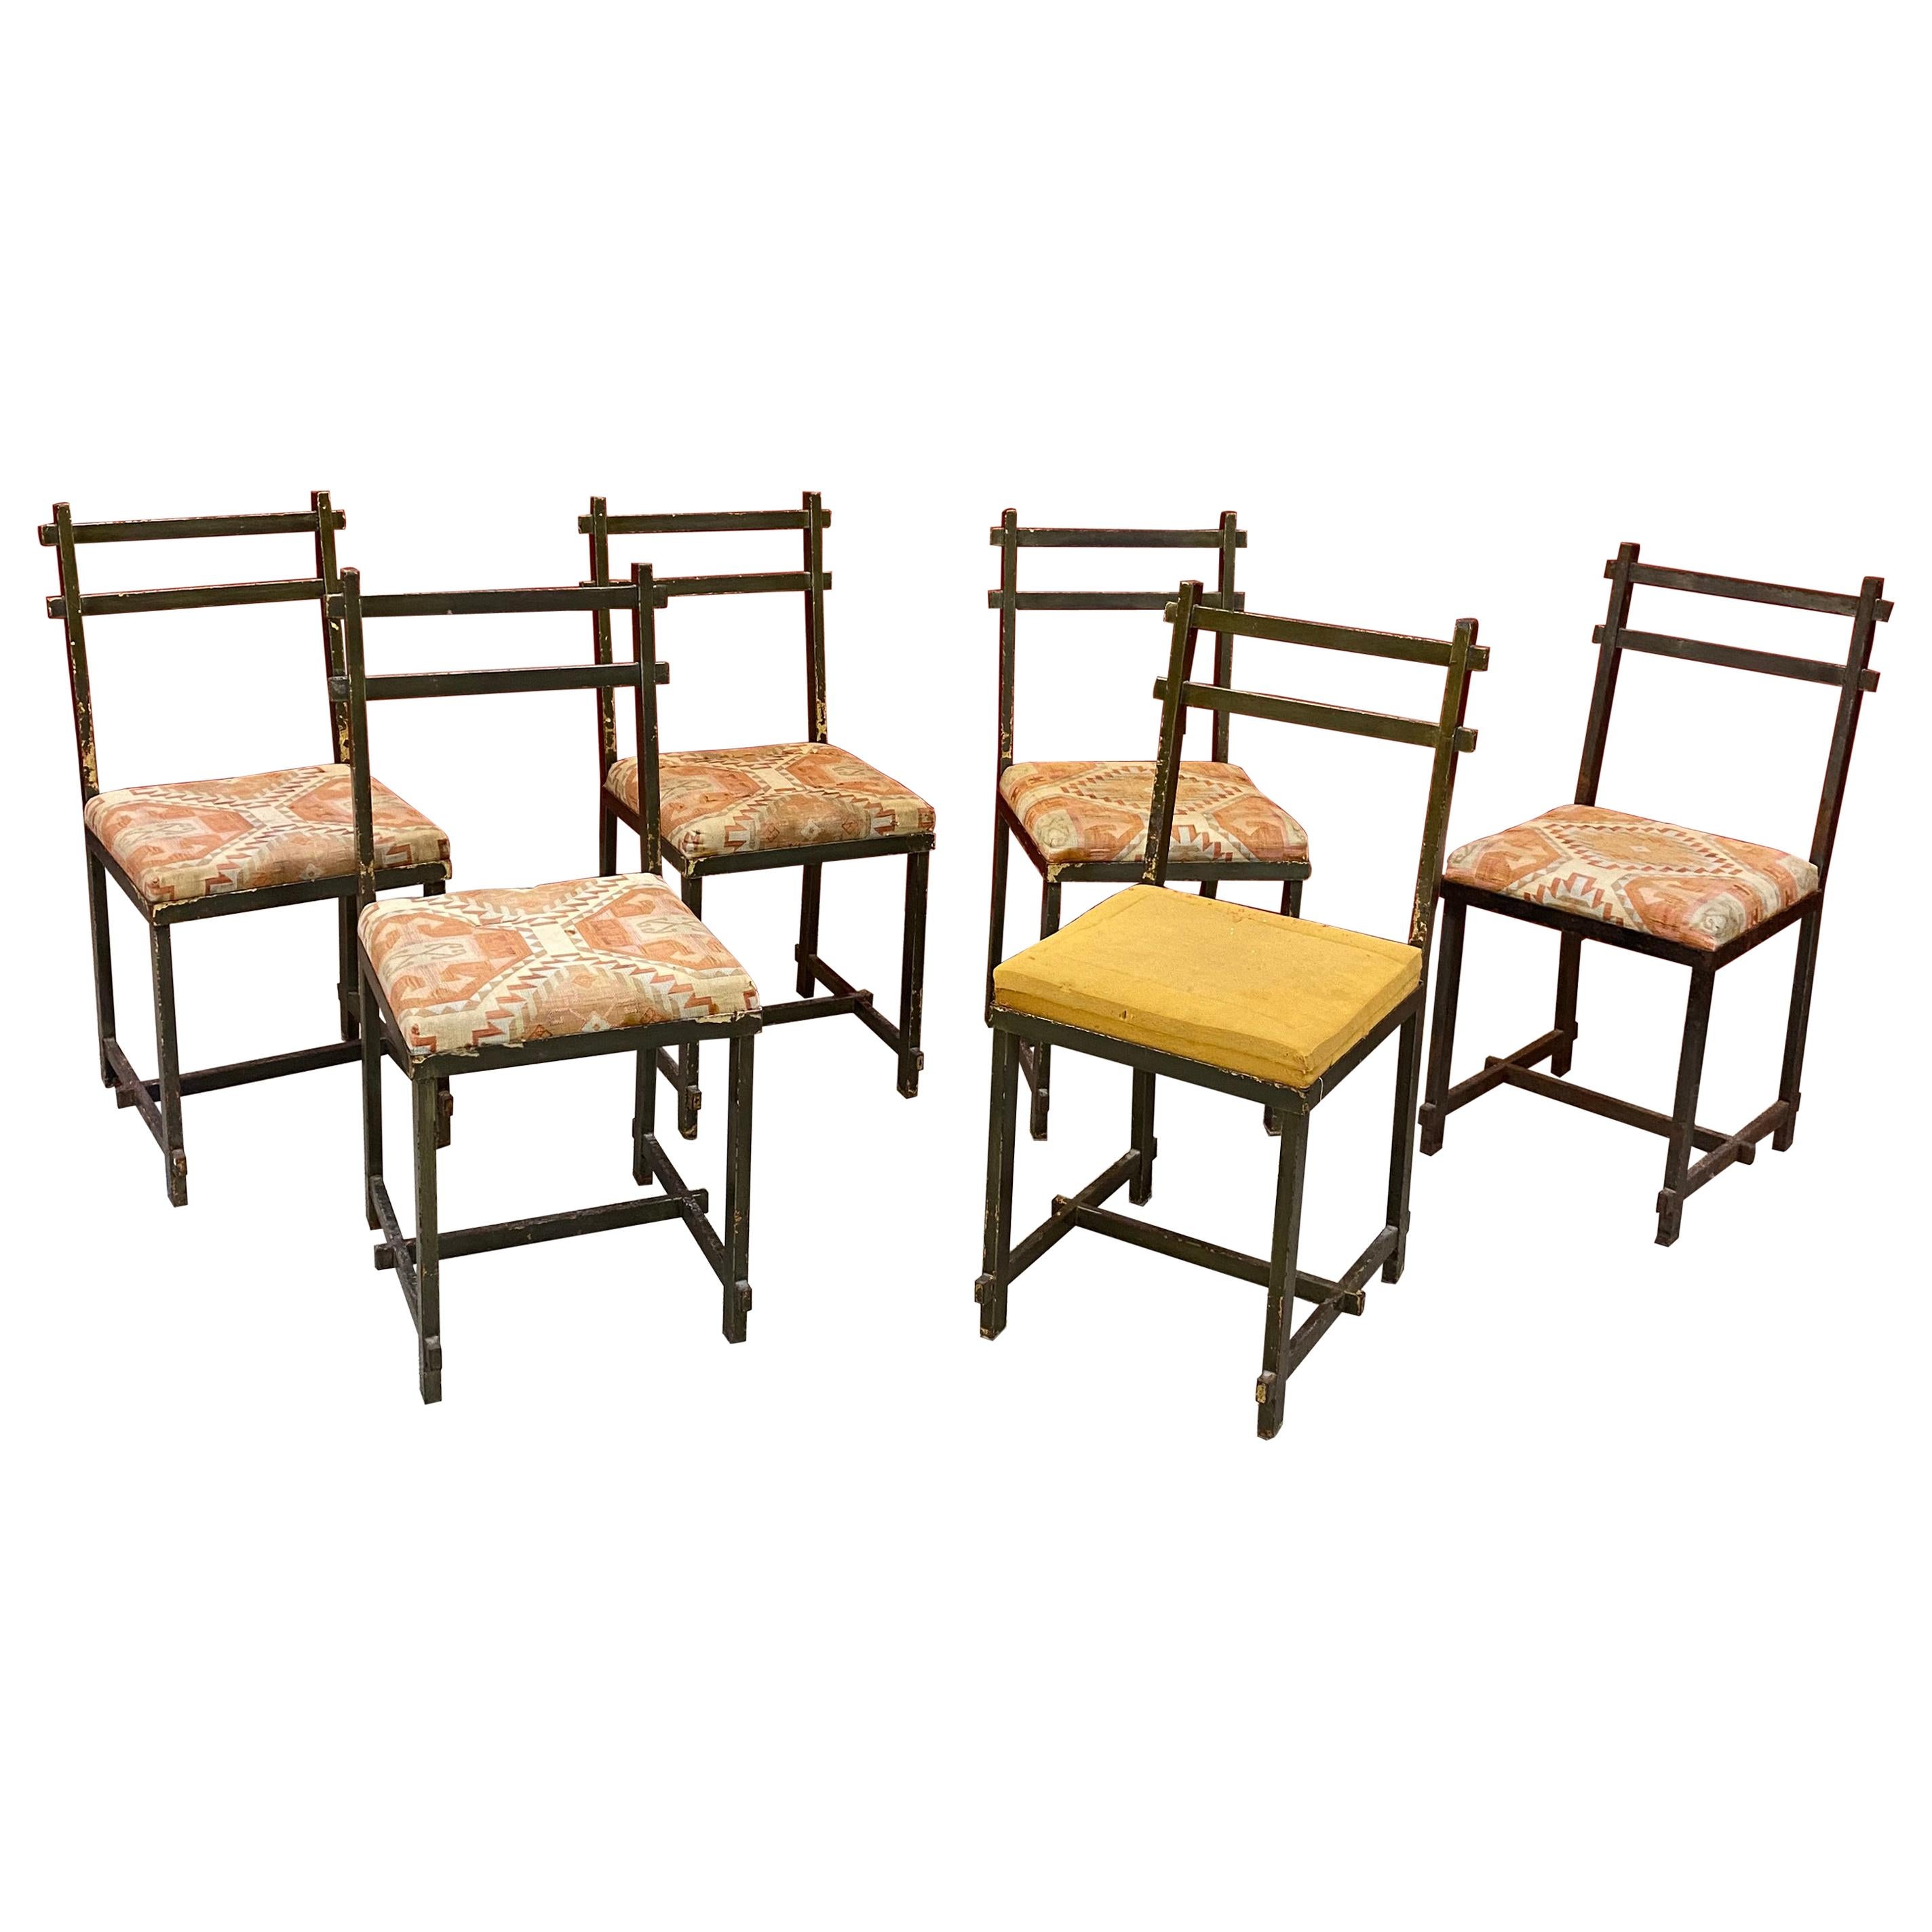 Original Chairs in Lacquered Metal, in the Style of Jacques Adnet circa 1940/195 For Sale